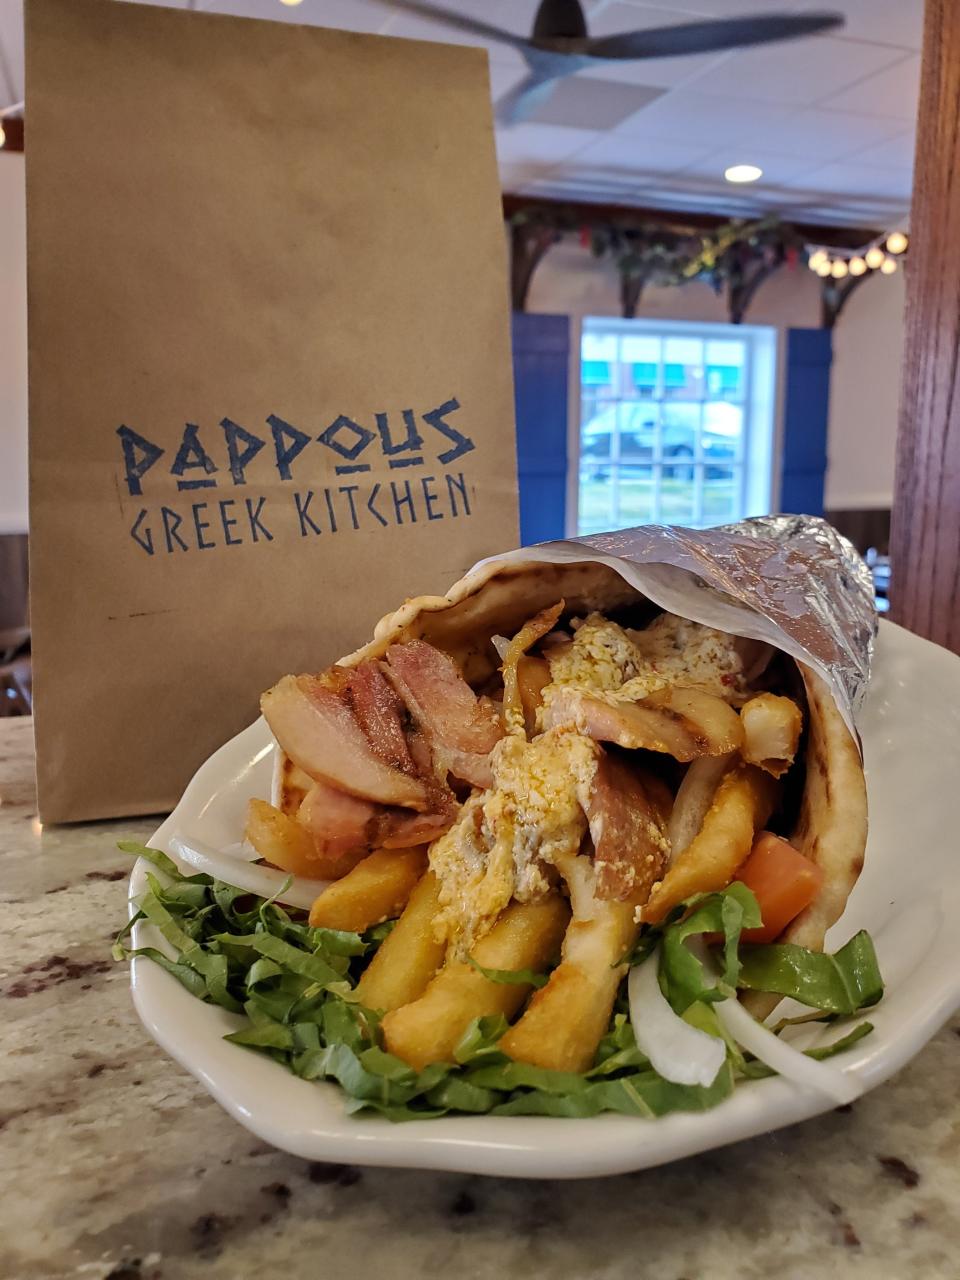 The chicken gyro sandwich is gluten-free at Pappaous Greek Kitchen in Yorktown Heights. The restaurant does a lot of business catering to gluten-free diets and has gotten a loyal following for it.